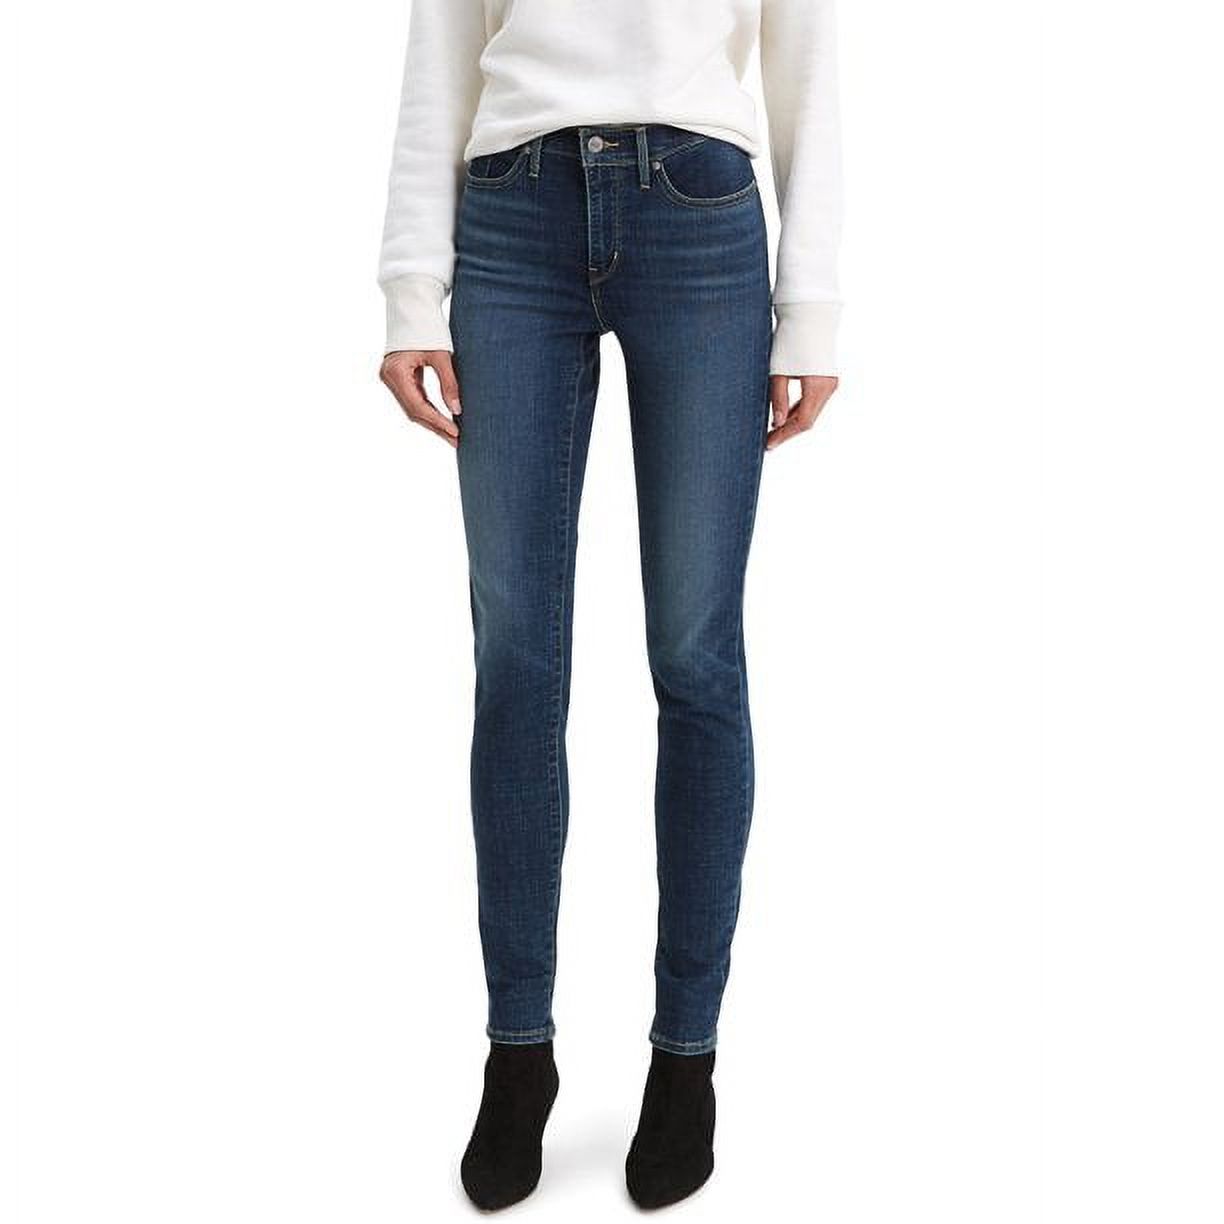 Levi’s Original Red Tab Women's 311 Shaping Skinny Jeans - image 1 of 4